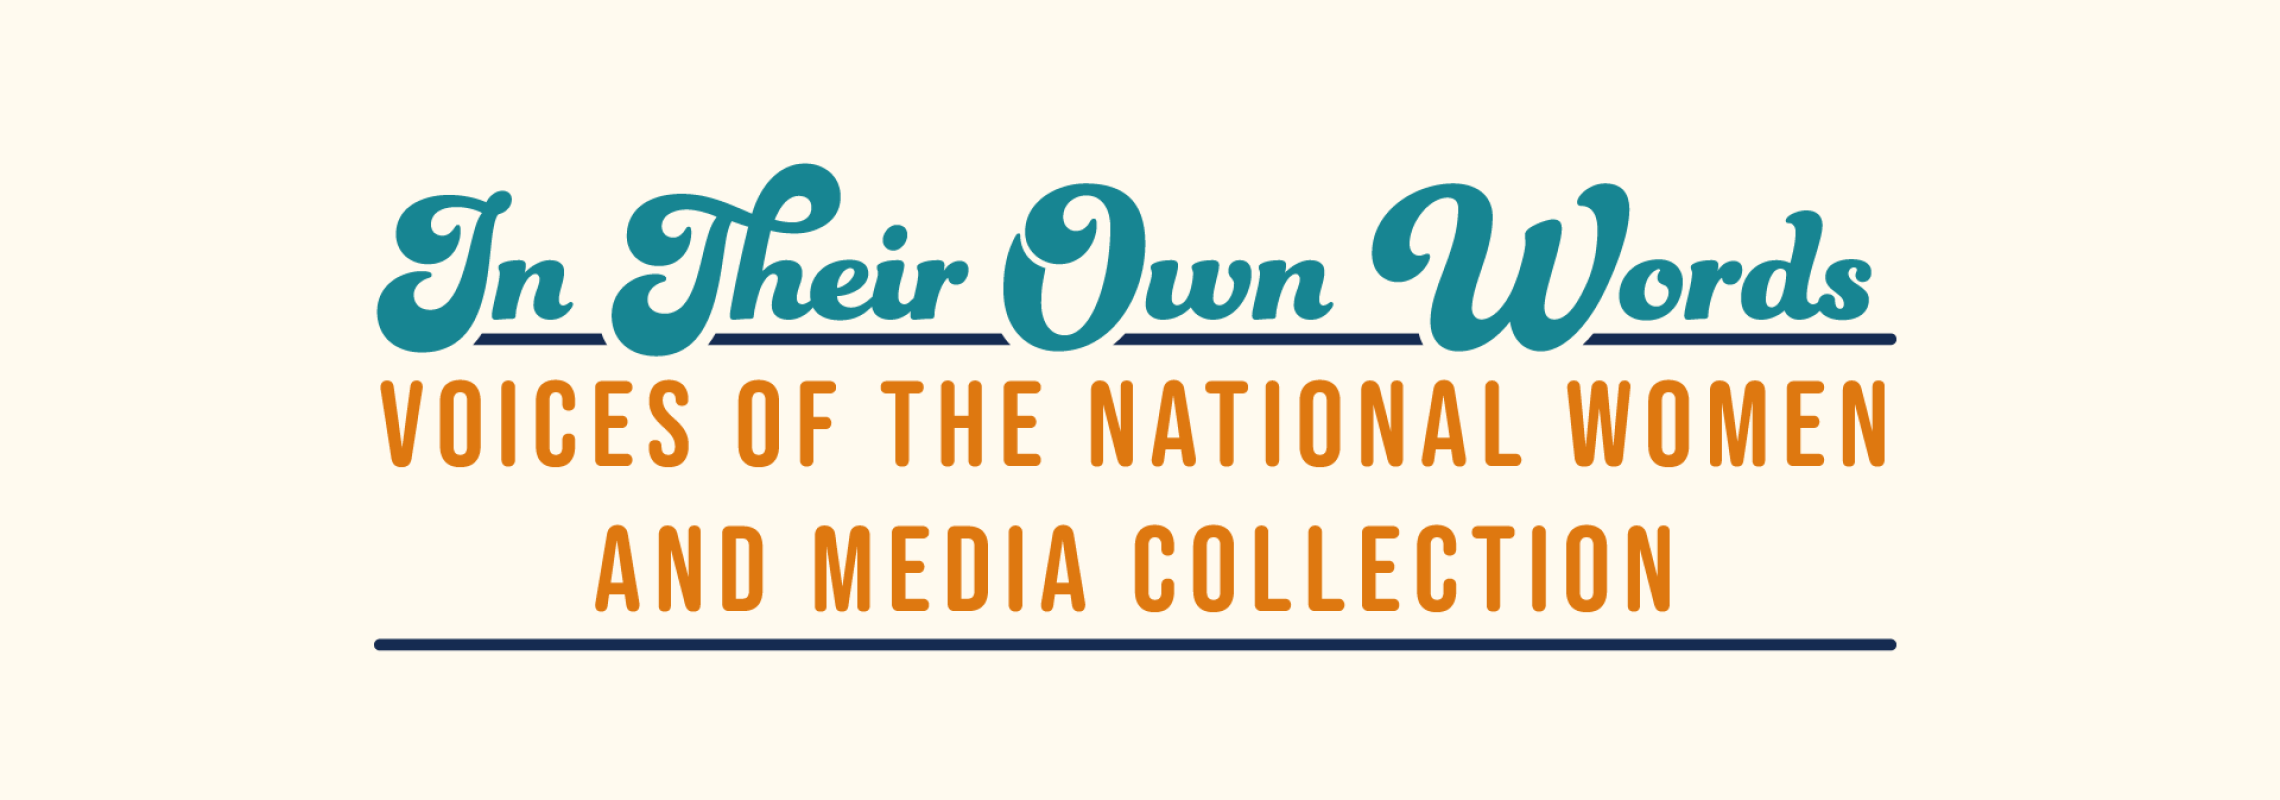 In Their Own Words: Voices of the National Women and Media Collection